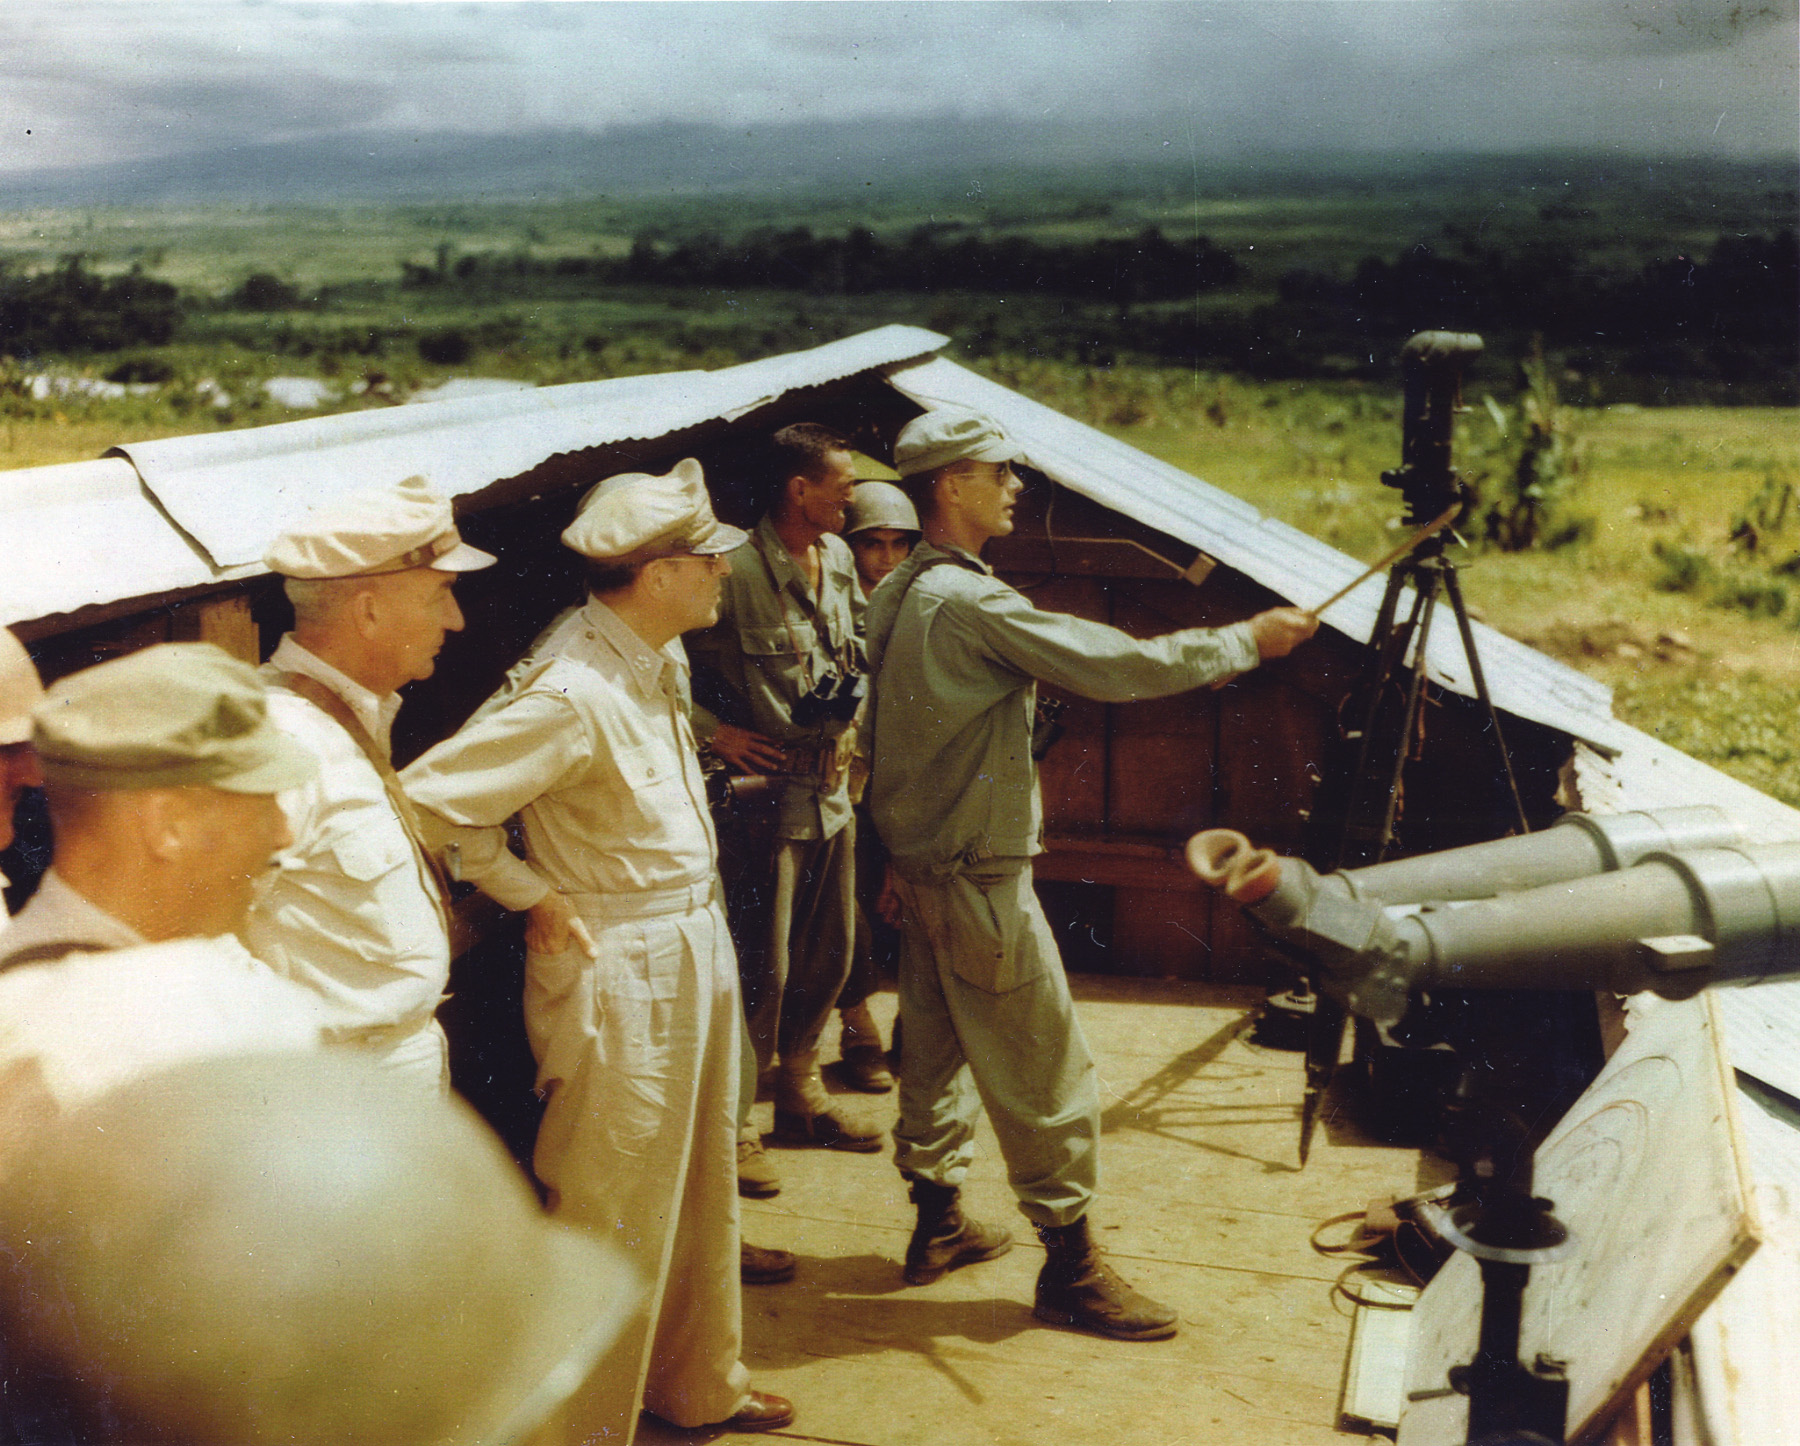 In order to better assess fighting conditions being endured by U.S. and British forces, General Douglas MacArthur and Lt. Gen. Robert Eichelberger take part in an island inspection.